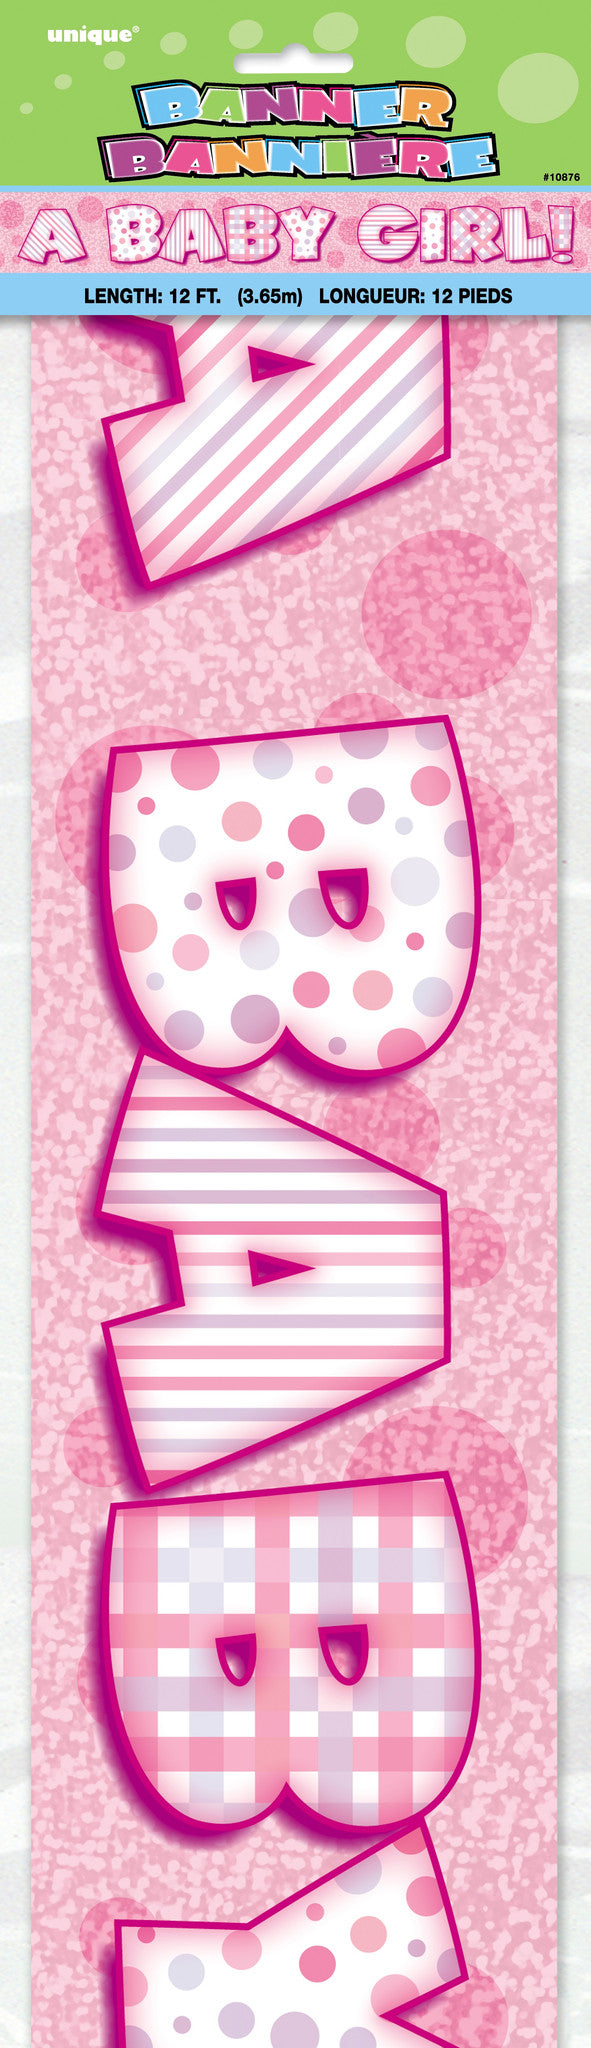 Pink Baby Girl Prismatic Foil Banner,[product type] - Baby Showers and More